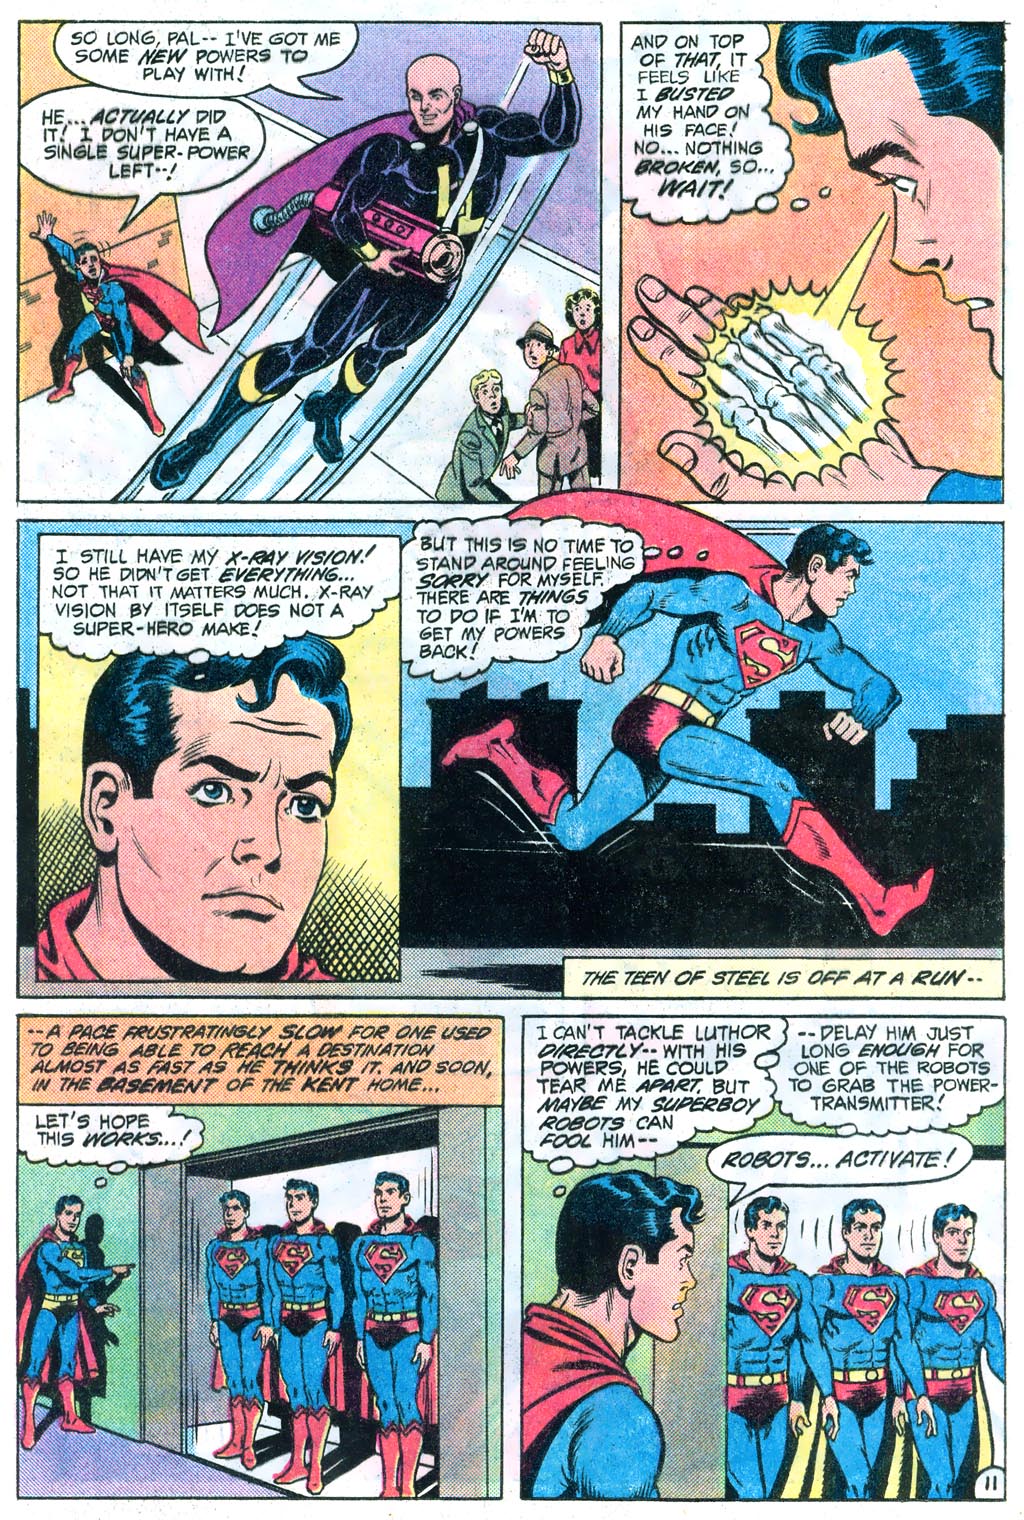 The New Adventures of Superboy 48 Page 15